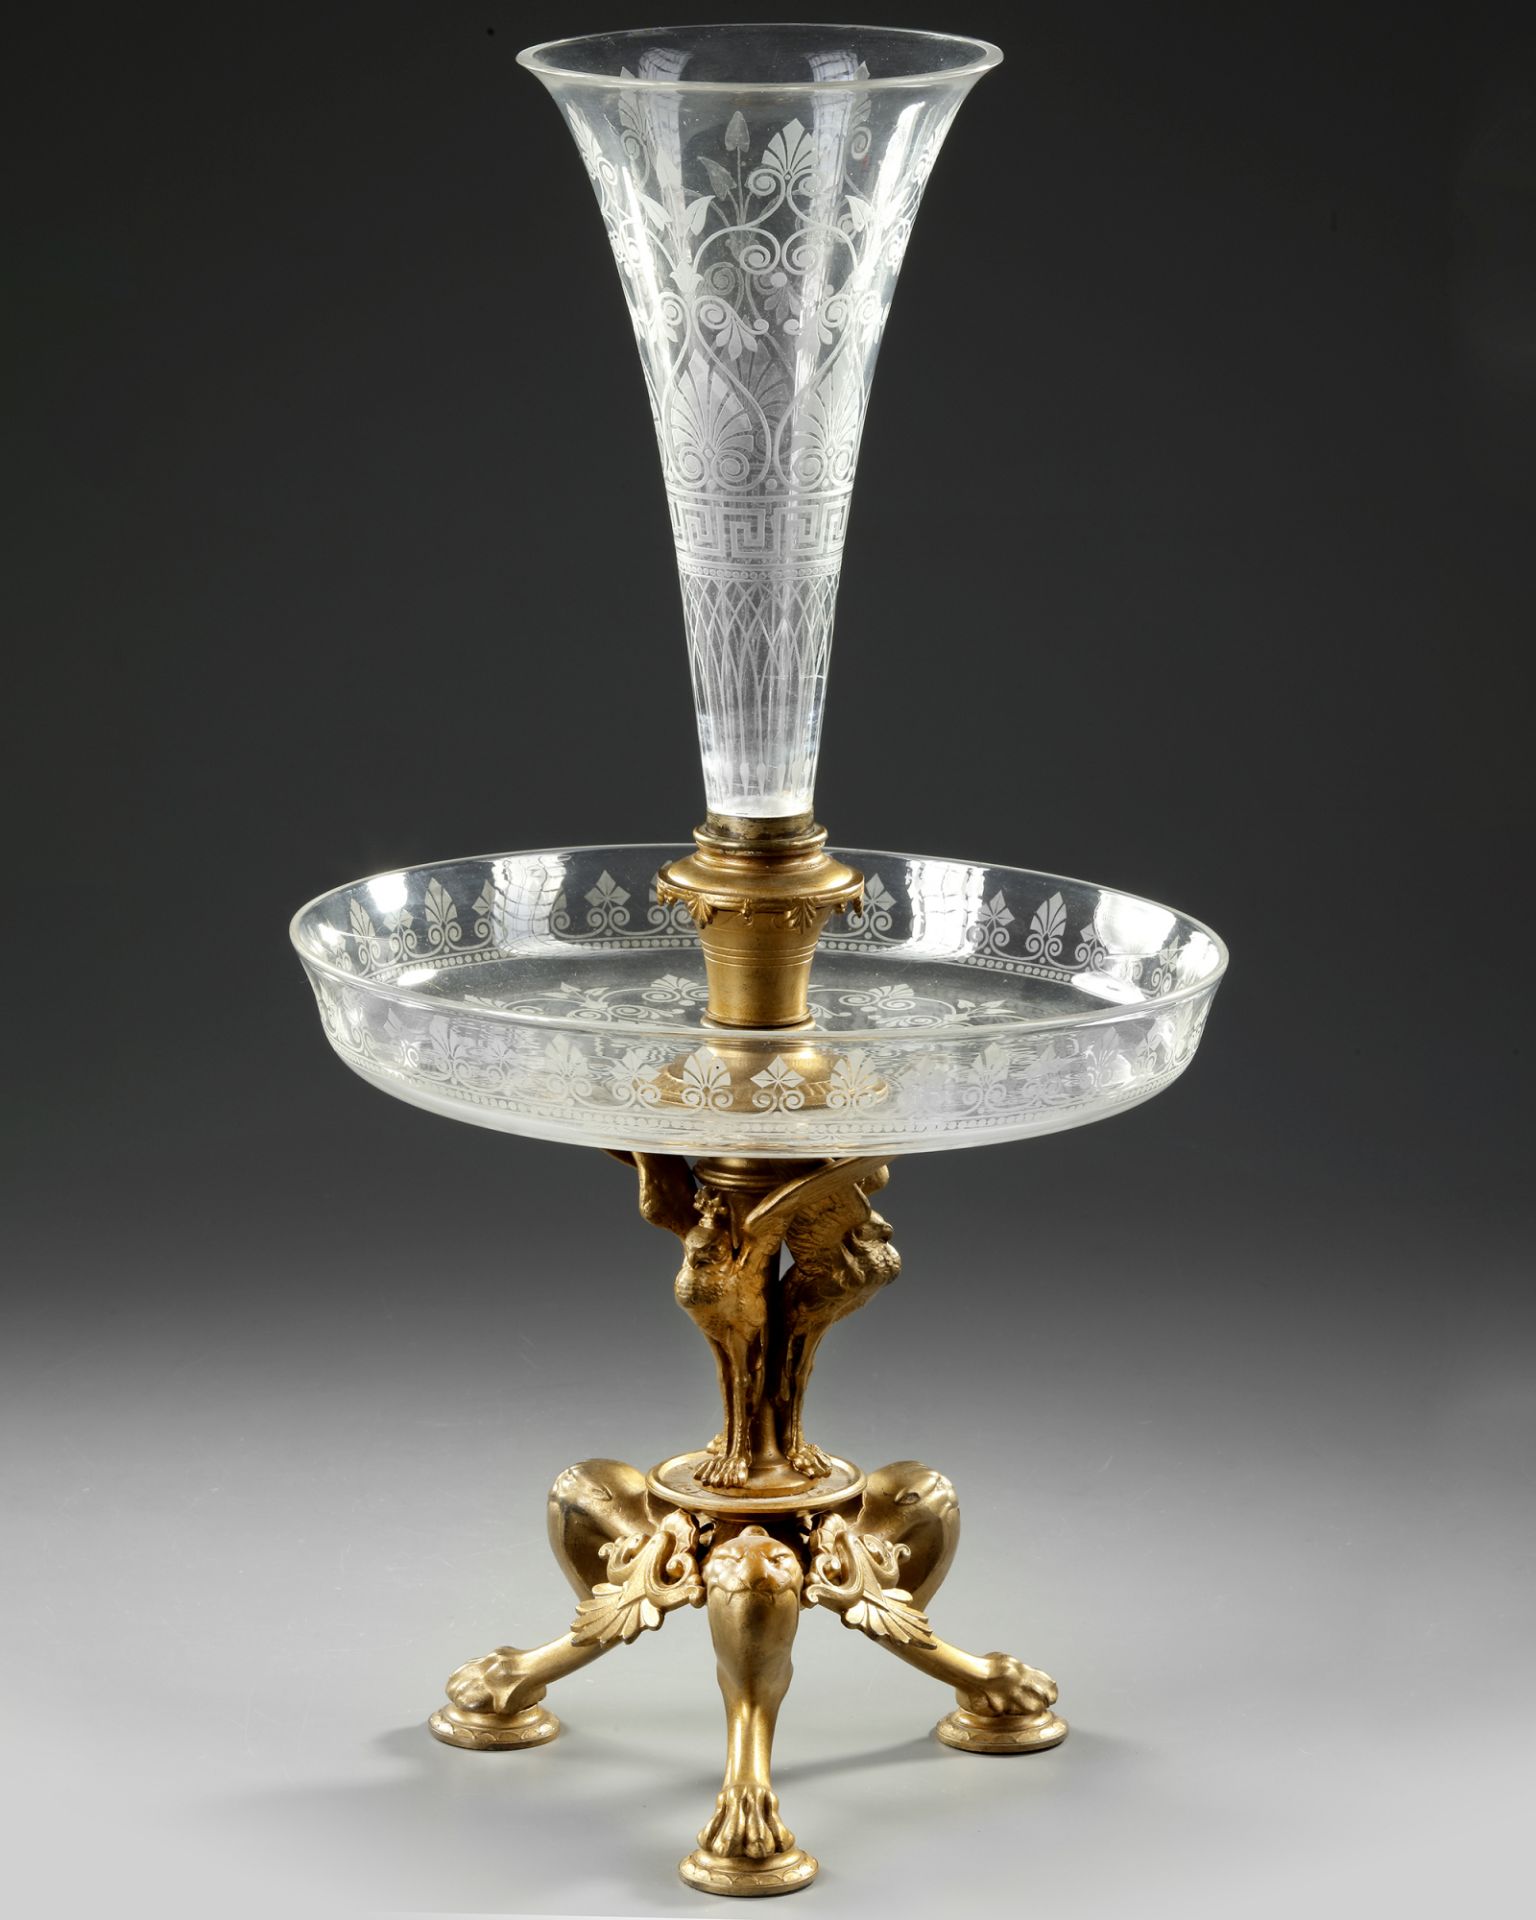 A CRYSTAL AND ORMOLU CENTER PIECE, FRANCE, LATE 19TH CENTURY - Image 2 of 3